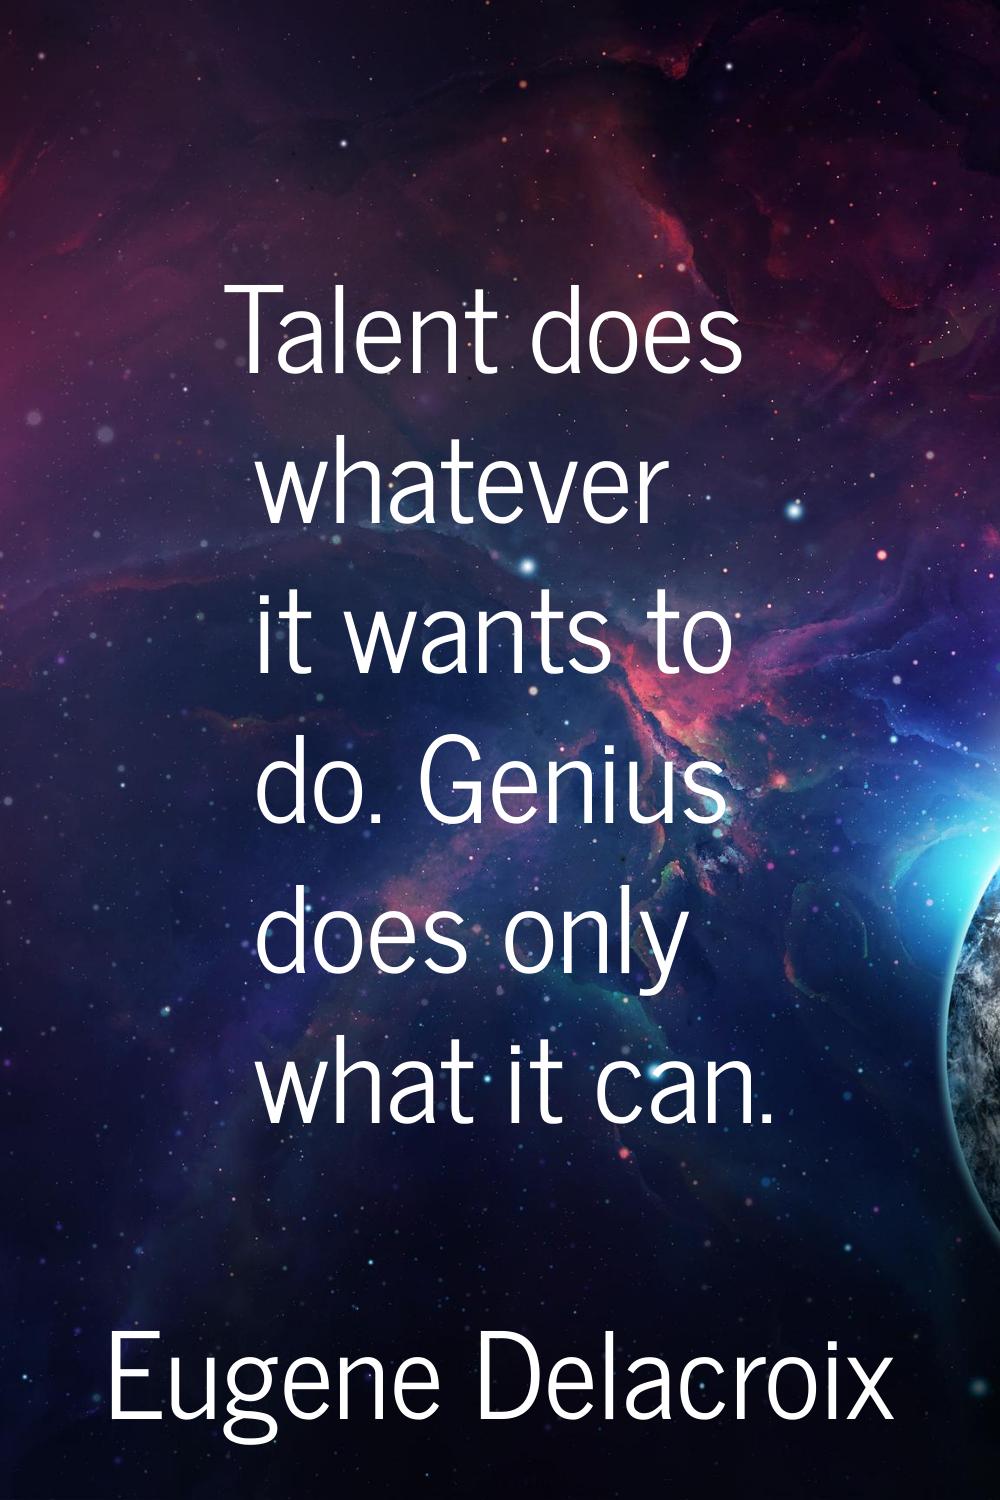 Talent does whatever it wants to do. Genius does only what it can.